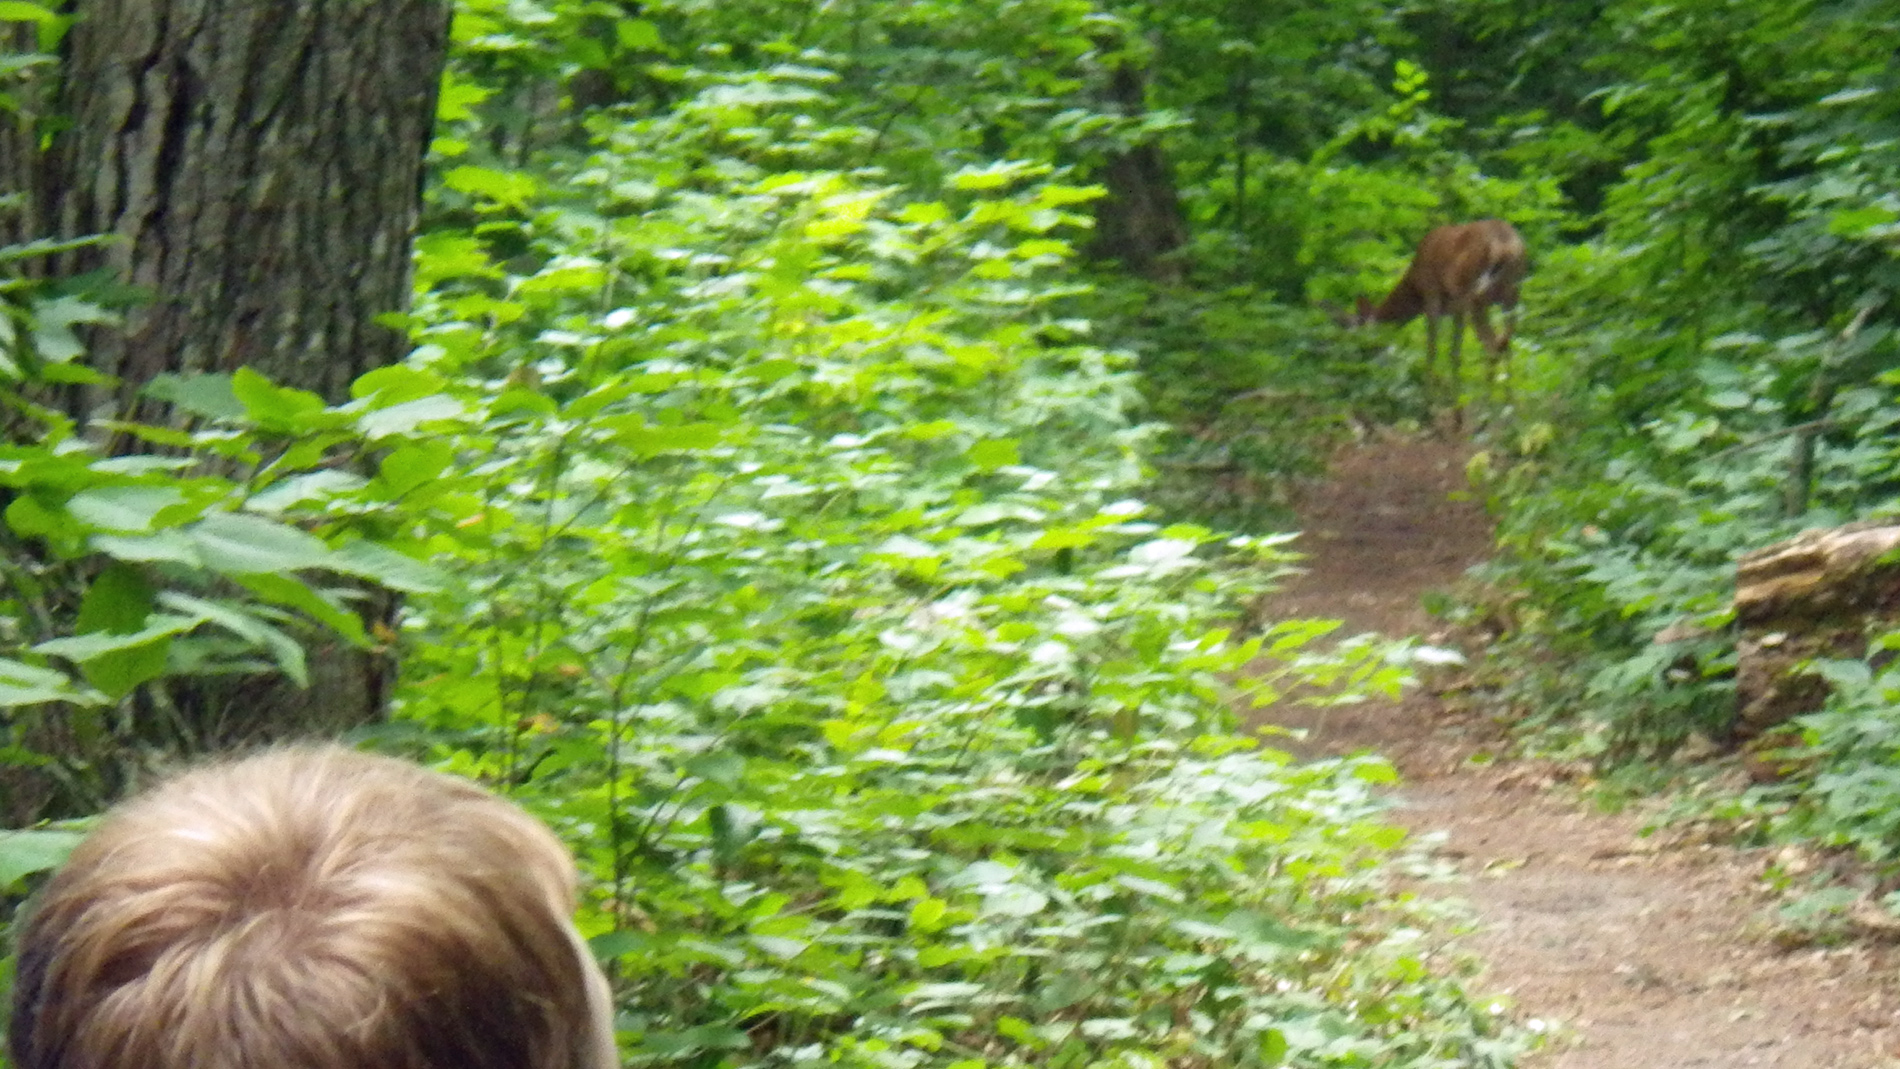 Deer in the trail. Watch a short  video snippet HERE.